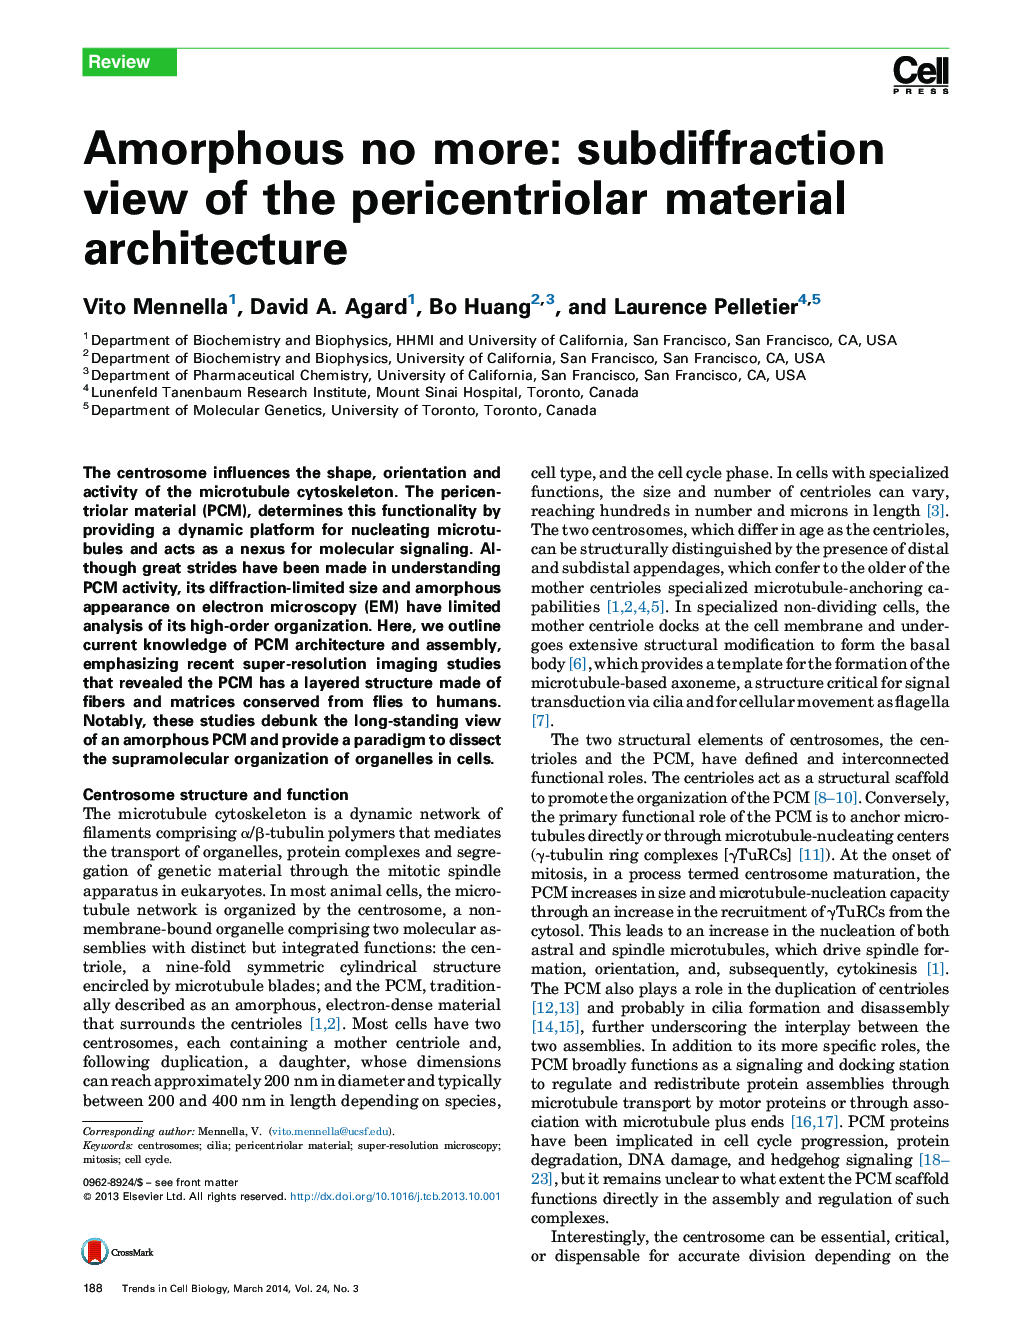 Amorphous no more: subdiffraction view of the pericentriolar material architecture